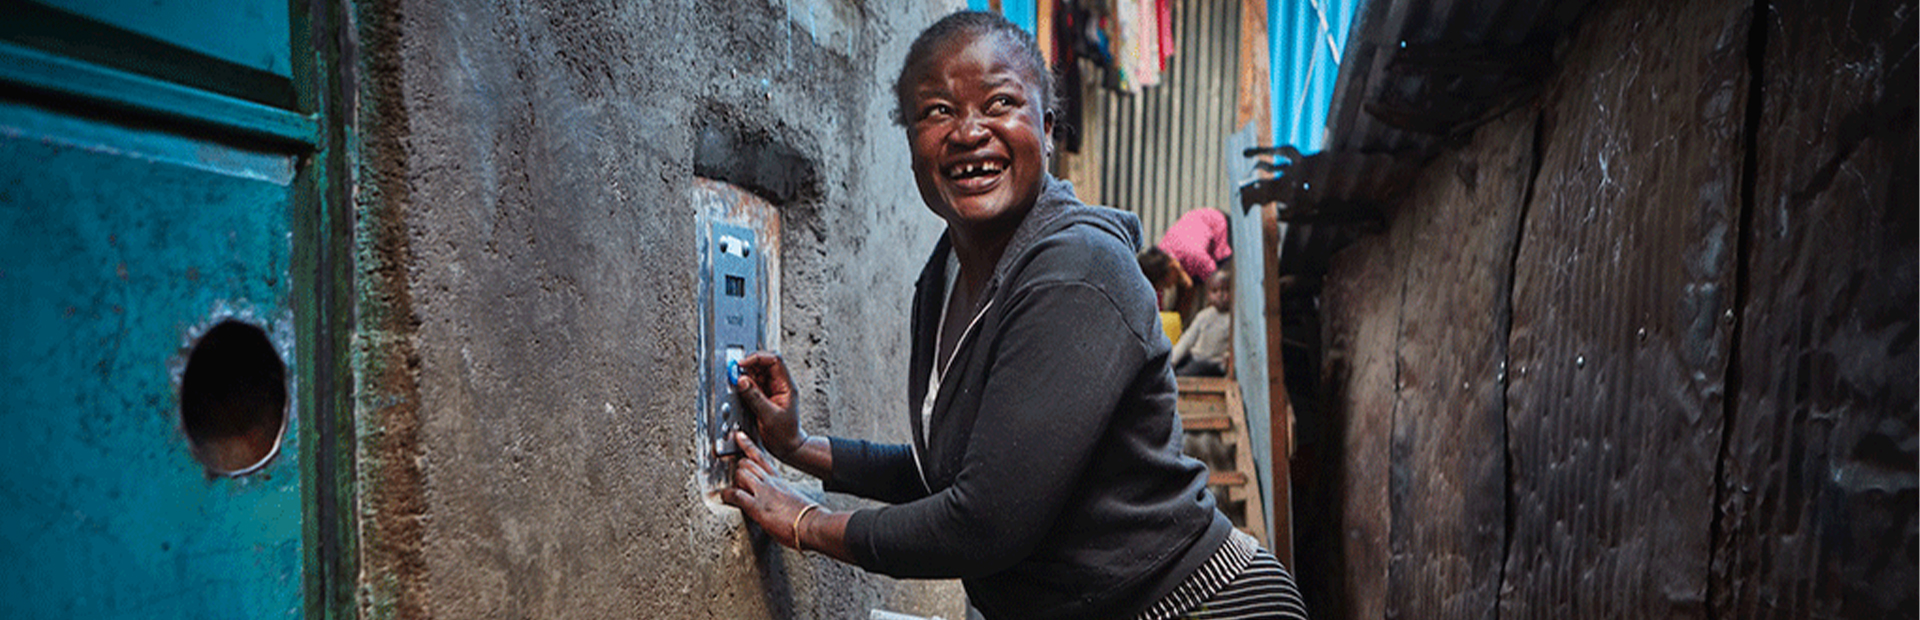 Access to clean water transforms Nairobi communities banner